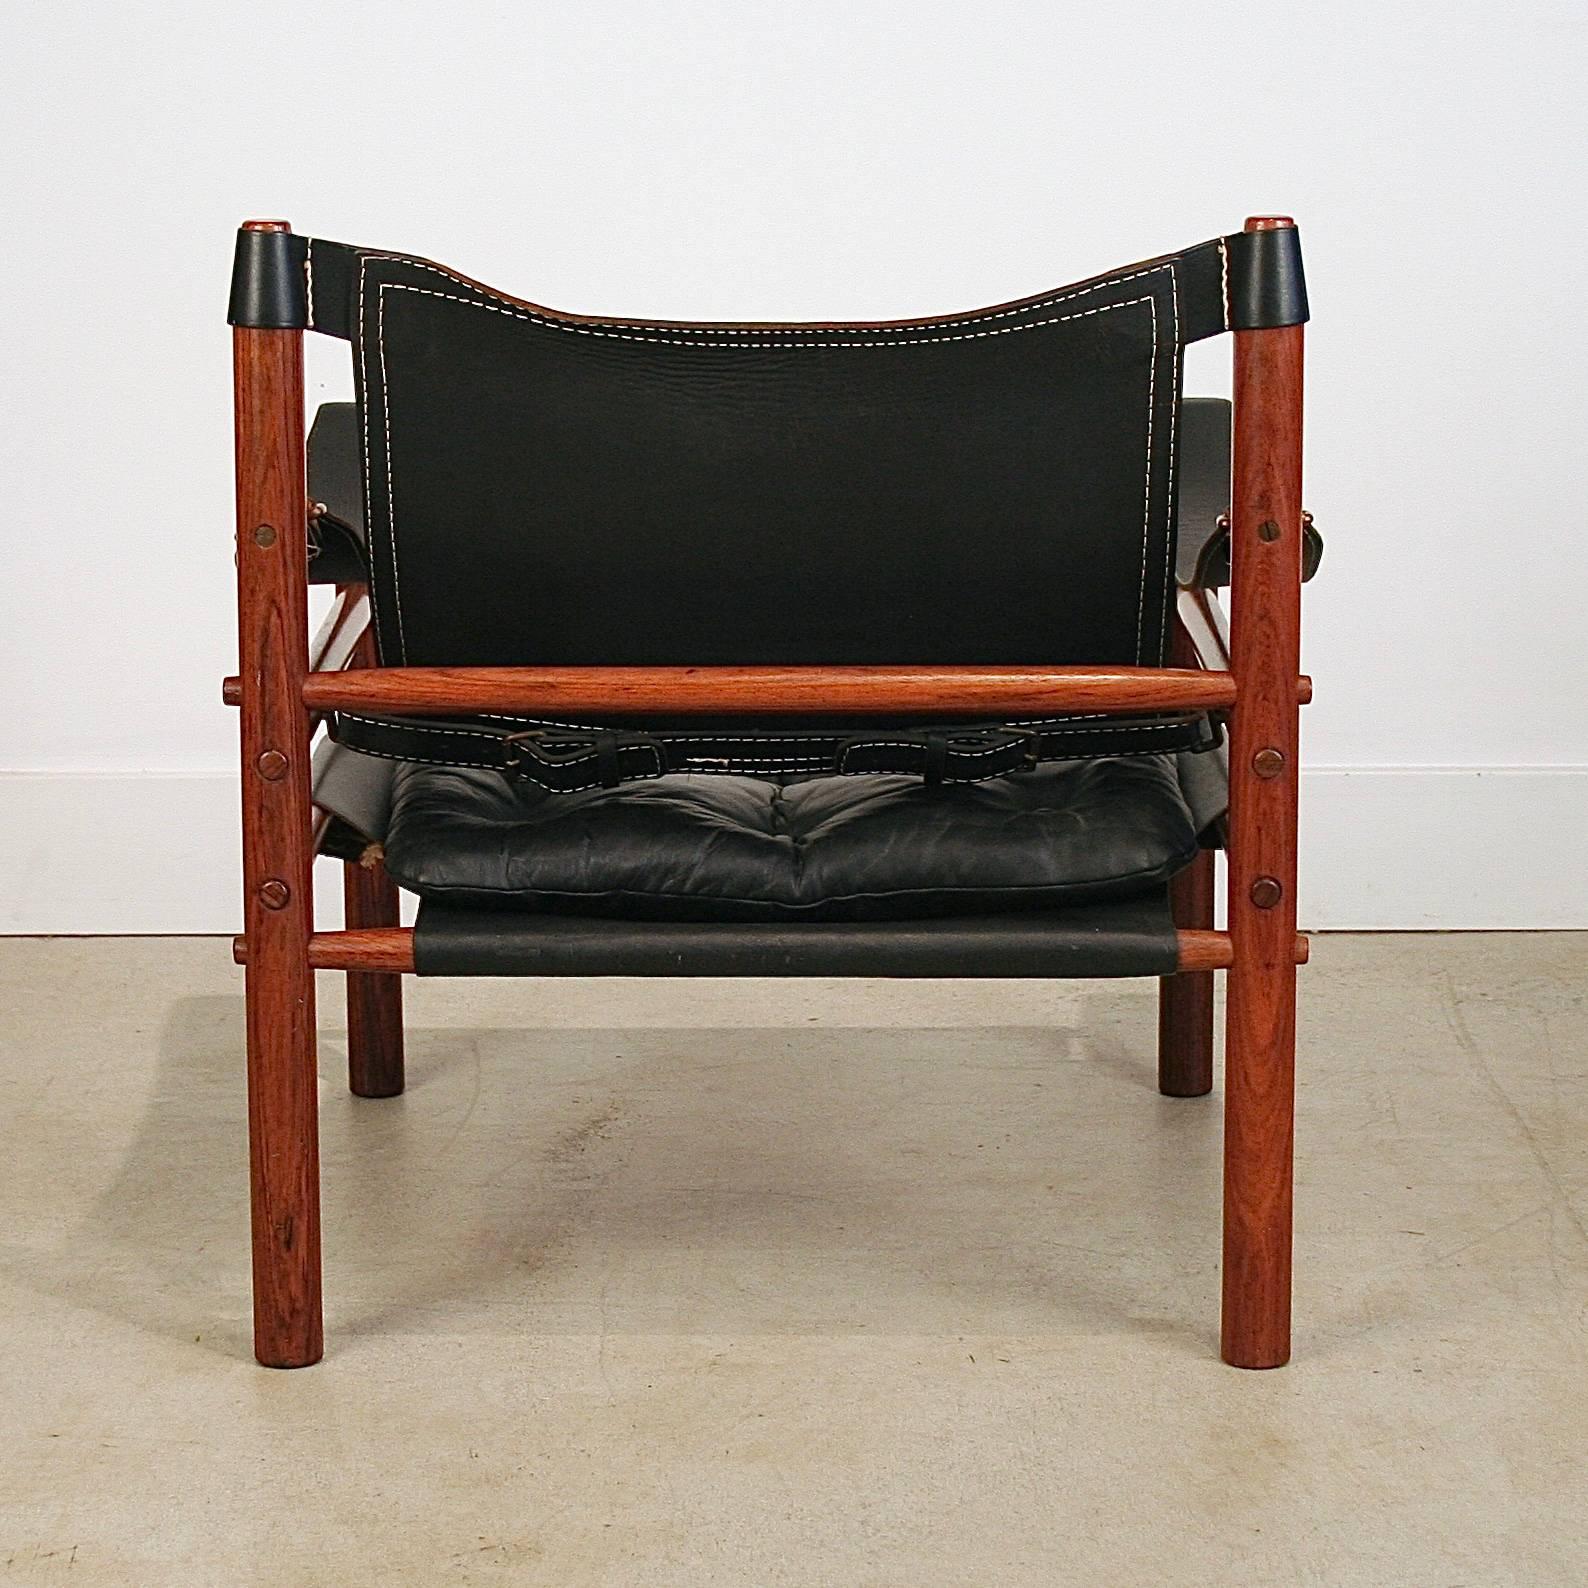 Beautiful Sirocco lounge chair by Arne Norell. Rosewood frame and black leather upholstery, with a removable cushion. Great details of wood plugs decorating the screw holes, seams in the leather and brass buckles. Made in Denmark.